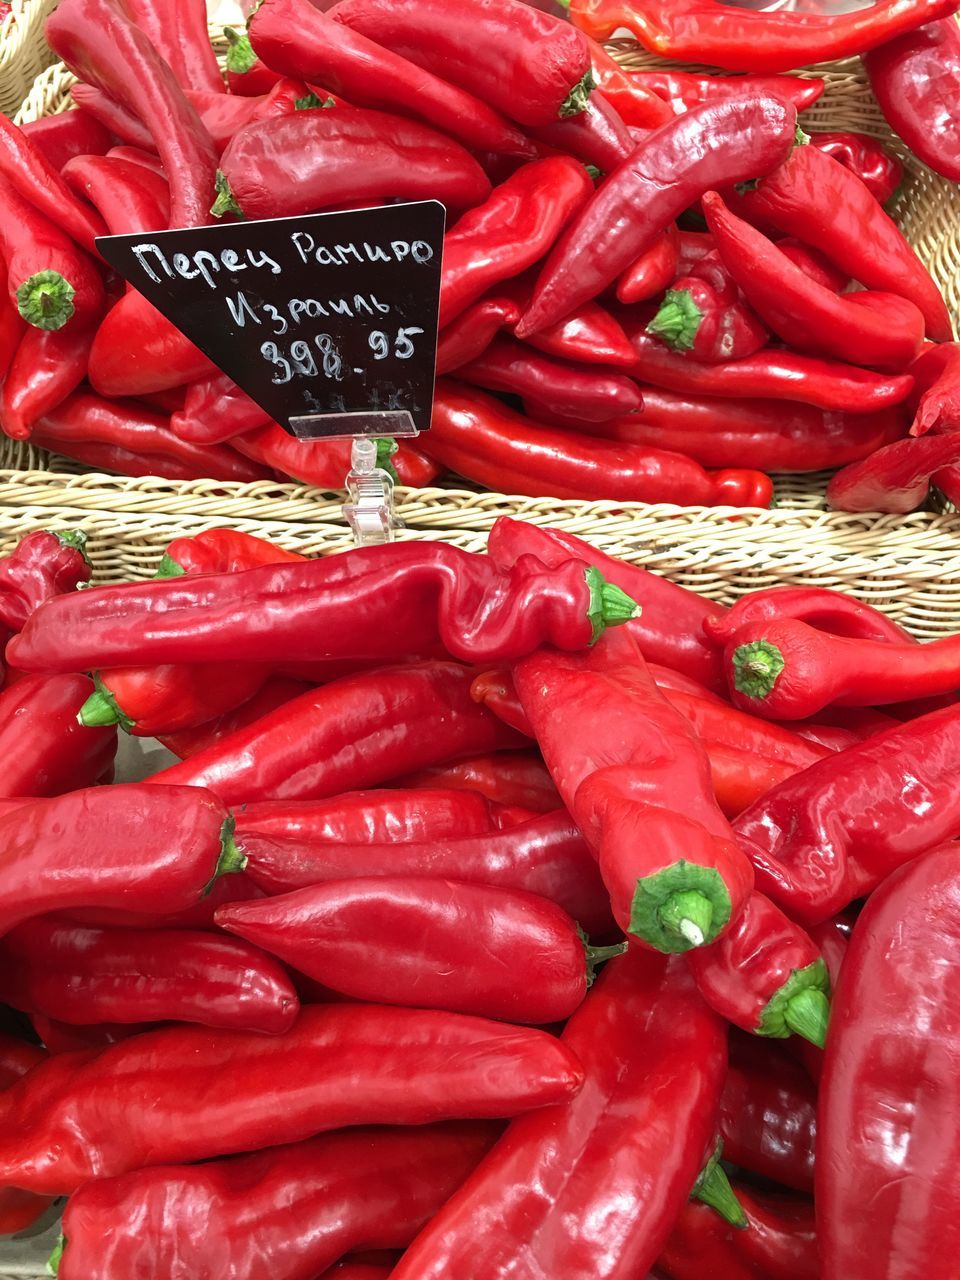 FULL FRAME SHOT OF RED CHILI PEPPERS FOR SALE AT MARKET STALL